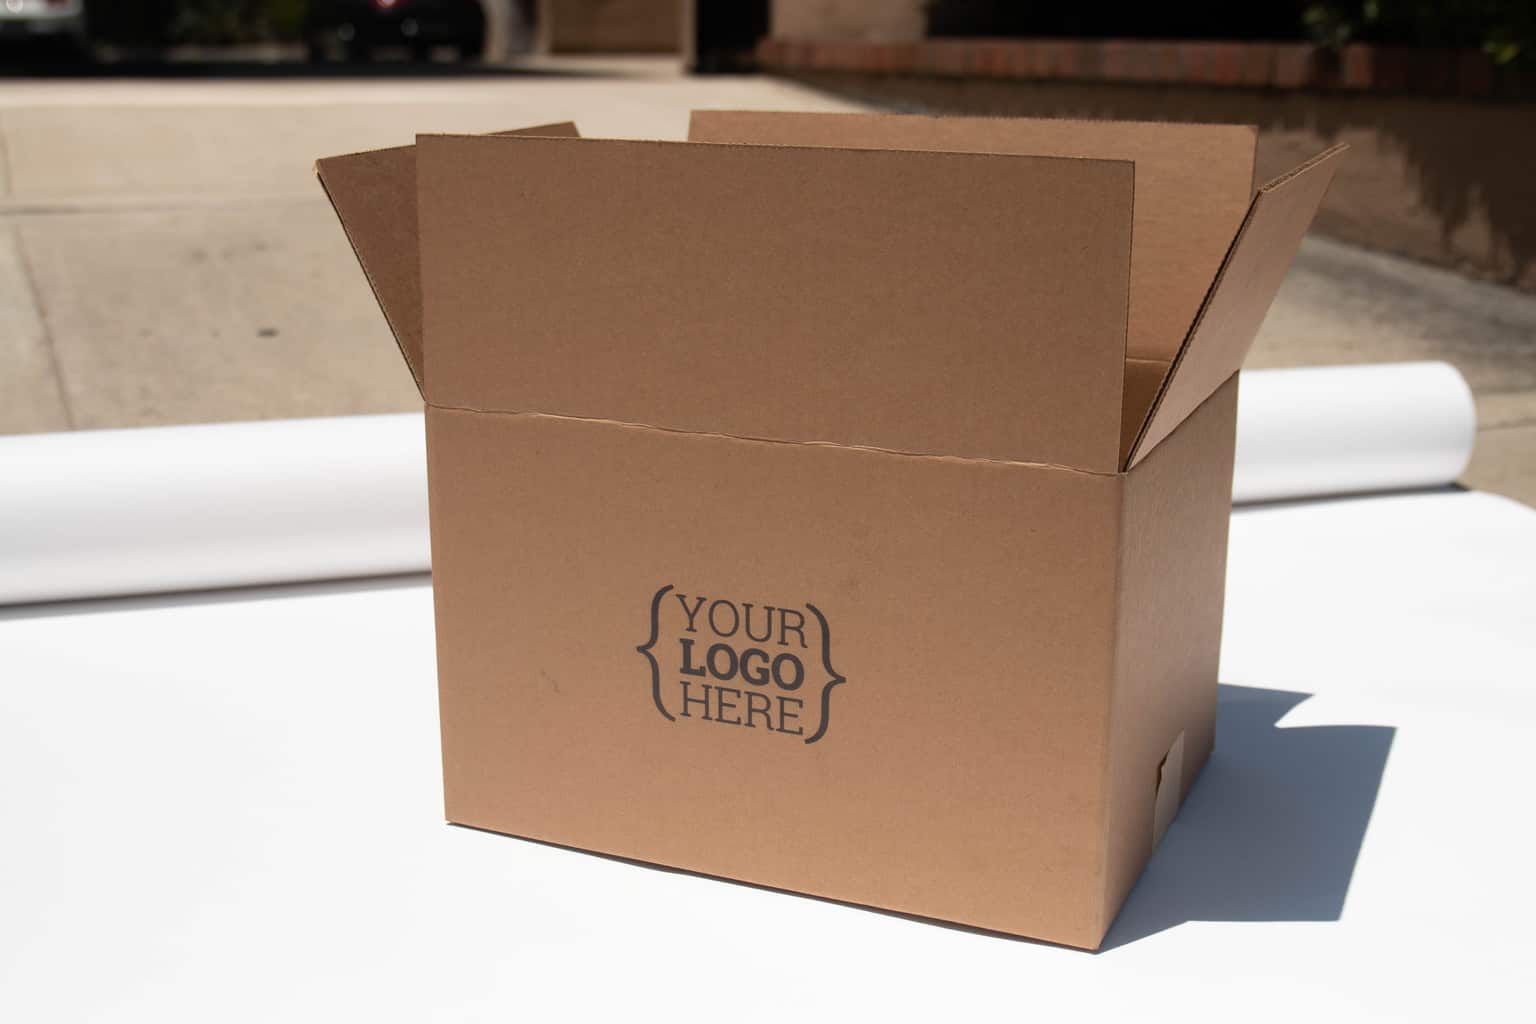 Why do people prefer to use a custom mailing box?